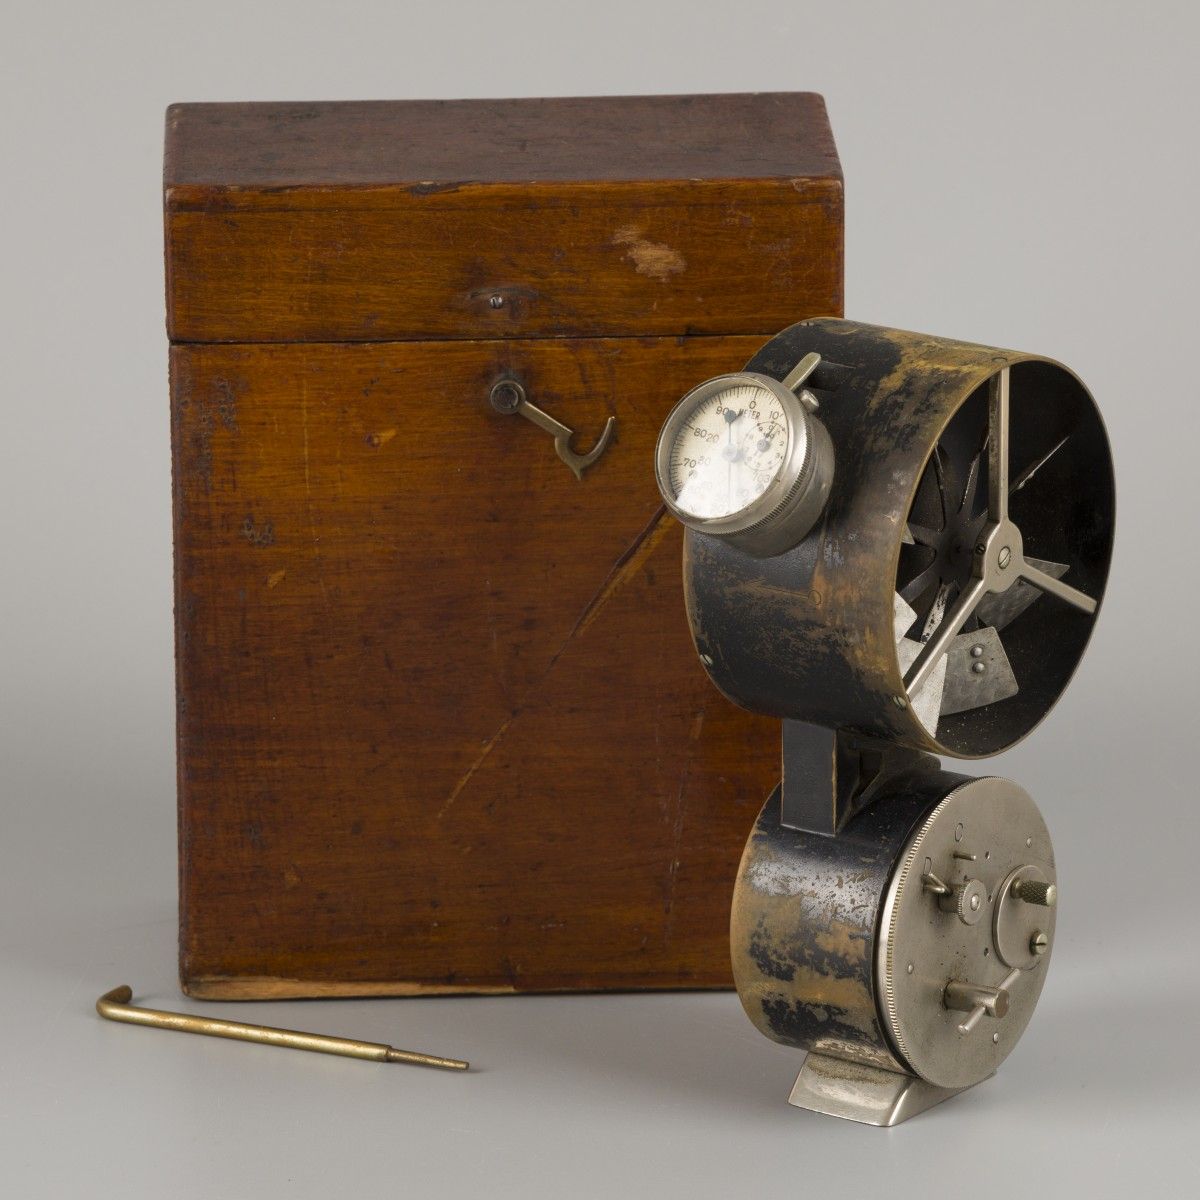 An anemometer in stained pinewood box, ca. 1920 / 1930. 用于测量风速的目的。估计：50-70欧元。